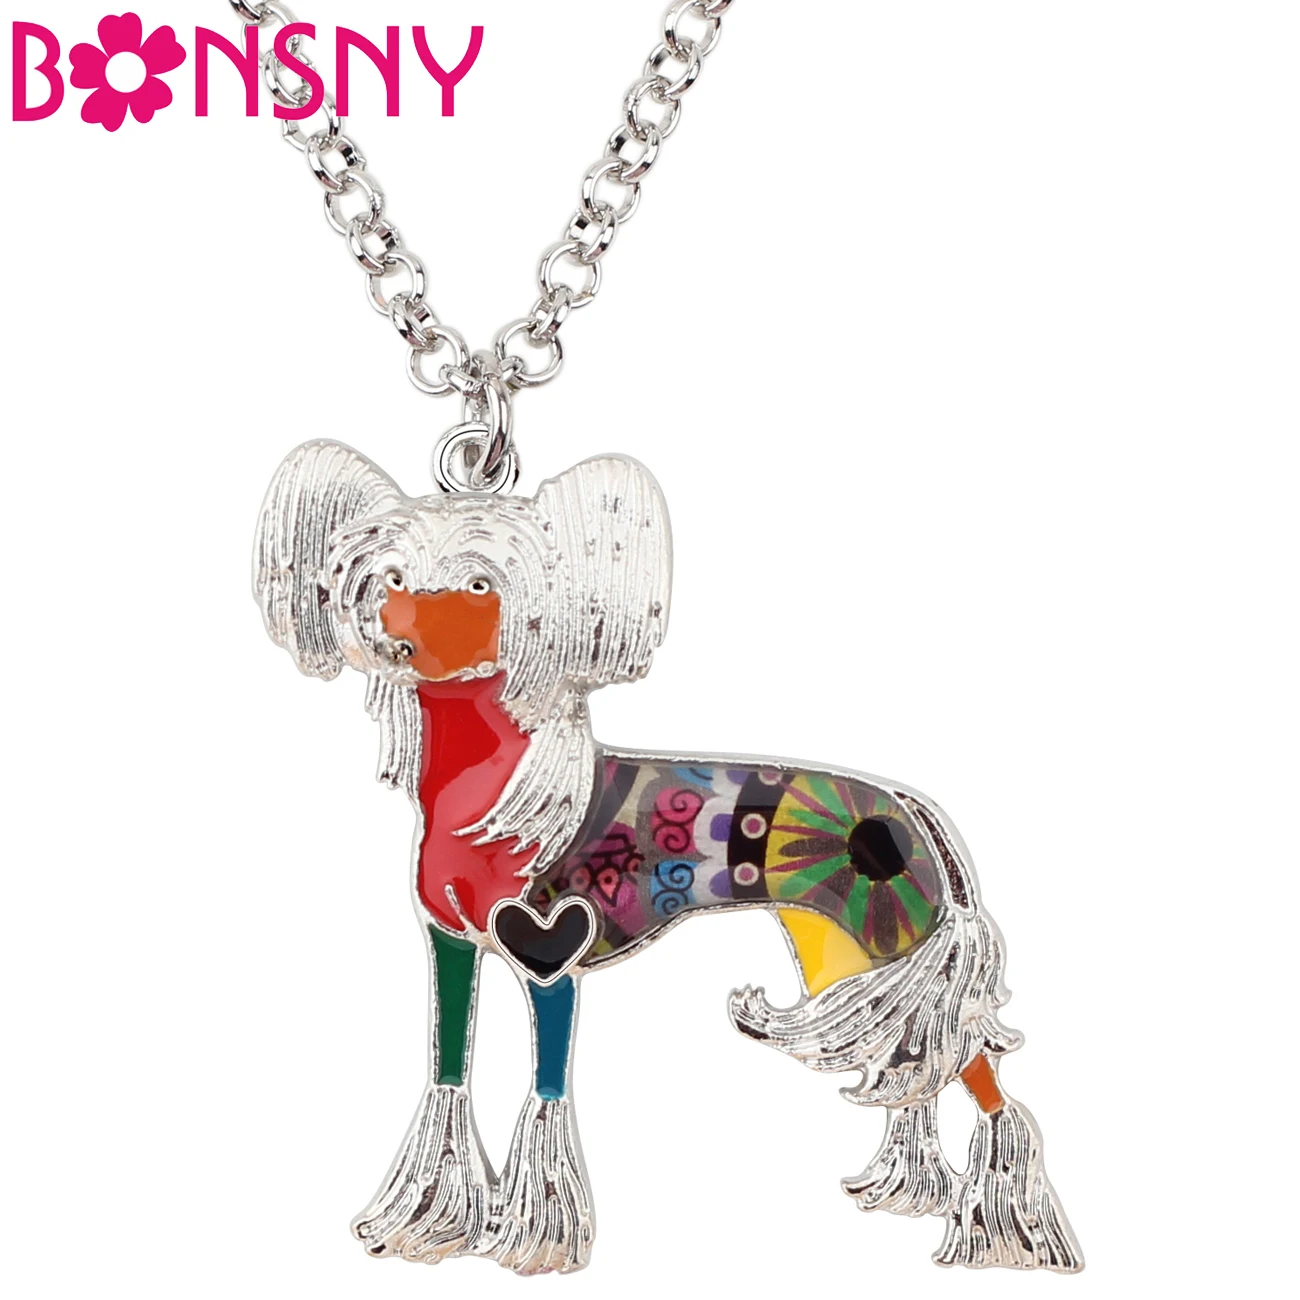 

Bonsny Statement Enamel Alloy Chinese Crested Dog Necklace Pendant Chain Choker Fashion Pet Animal Jewelry For Women Girls Gifts